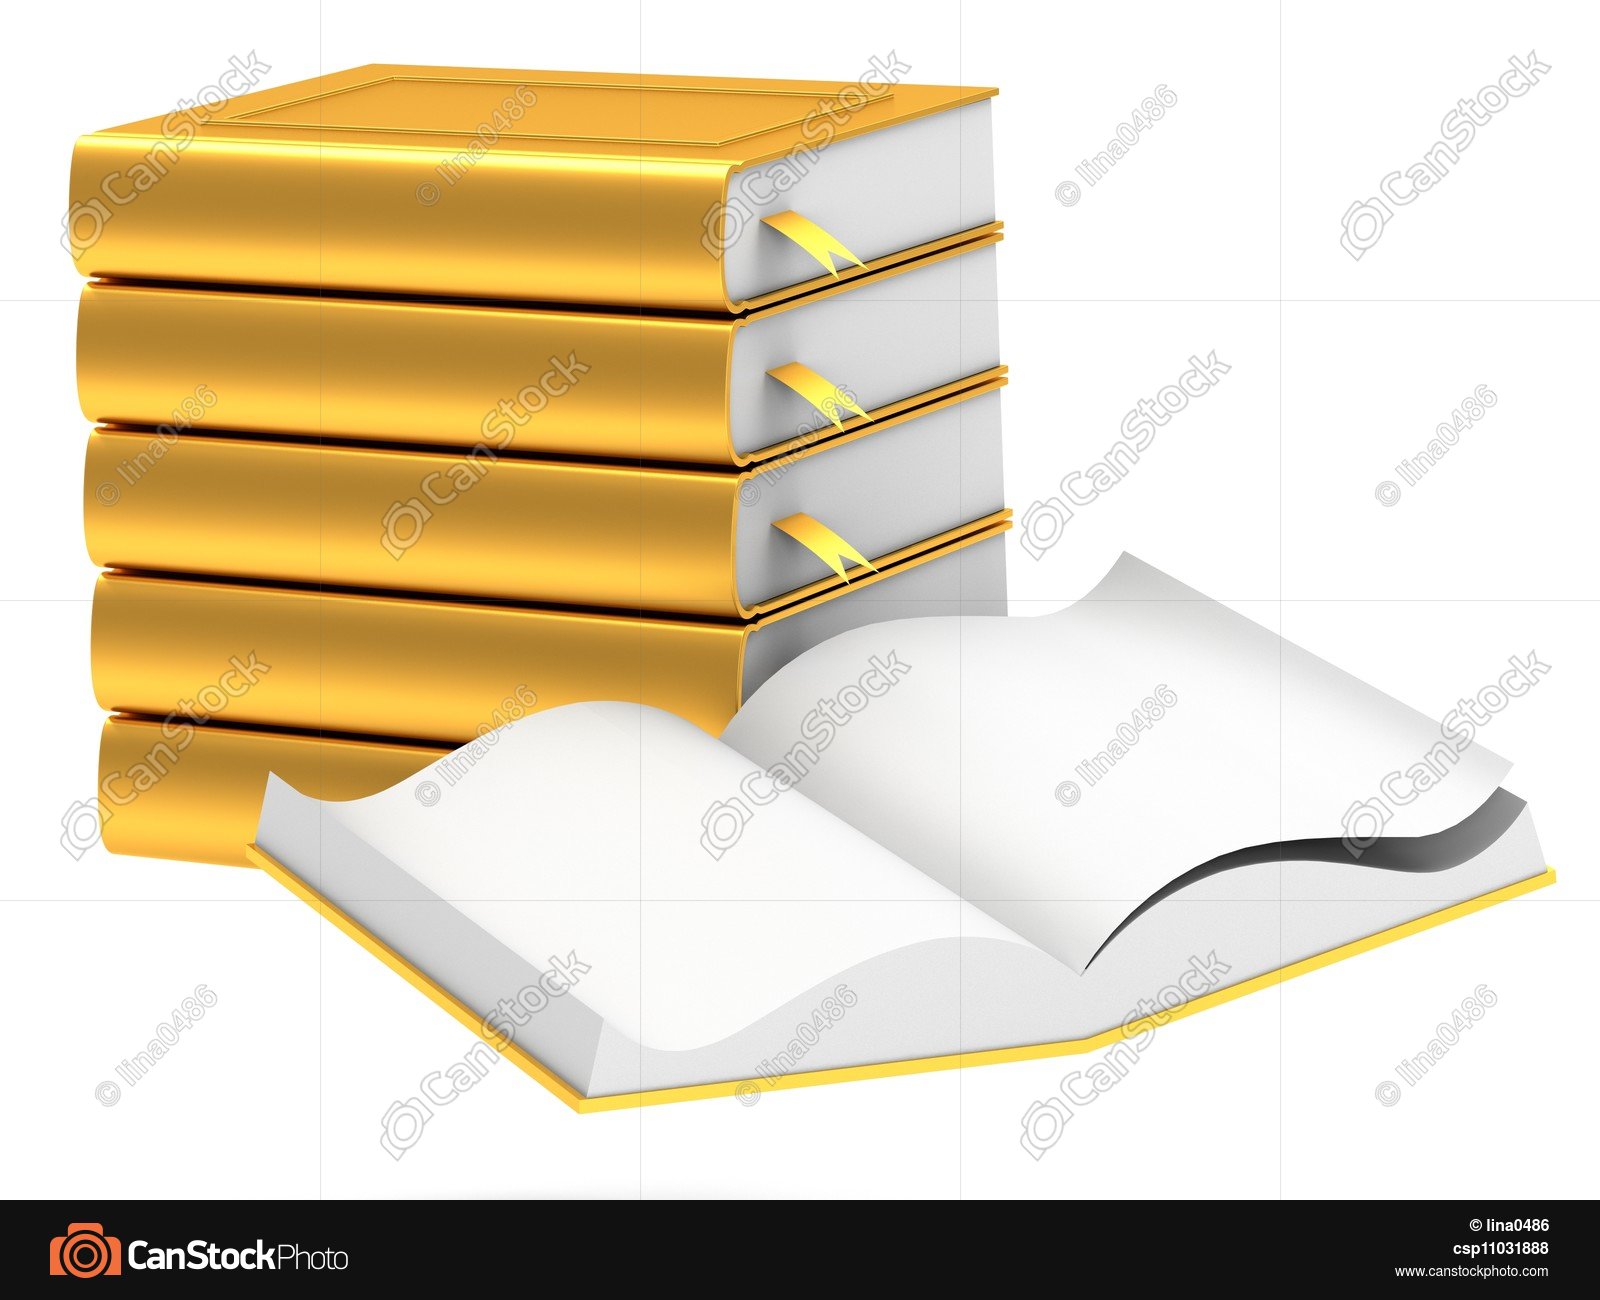 Gold stack of books isolated on white background stock illustration ...